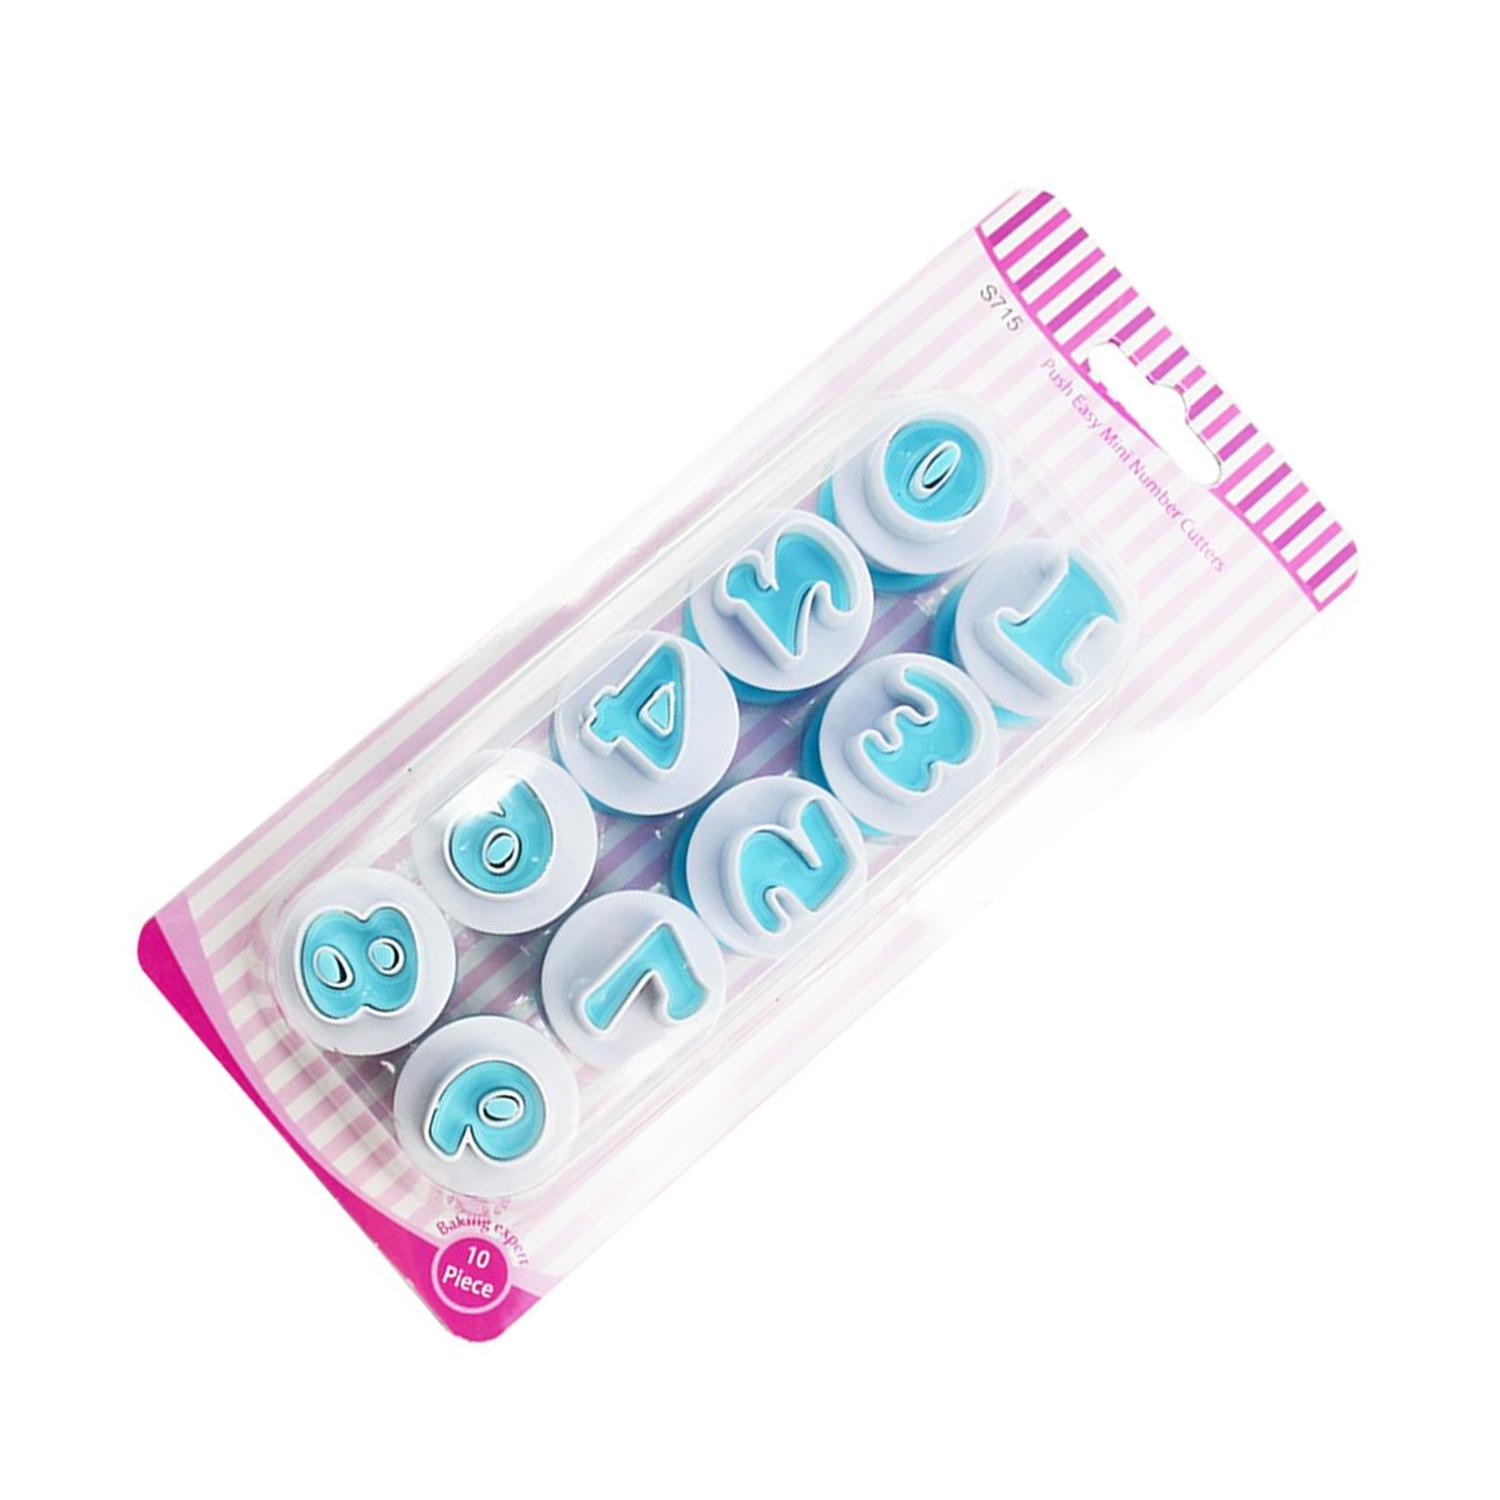 10PC PUSH EASY MINI NUMBER CUTTERS